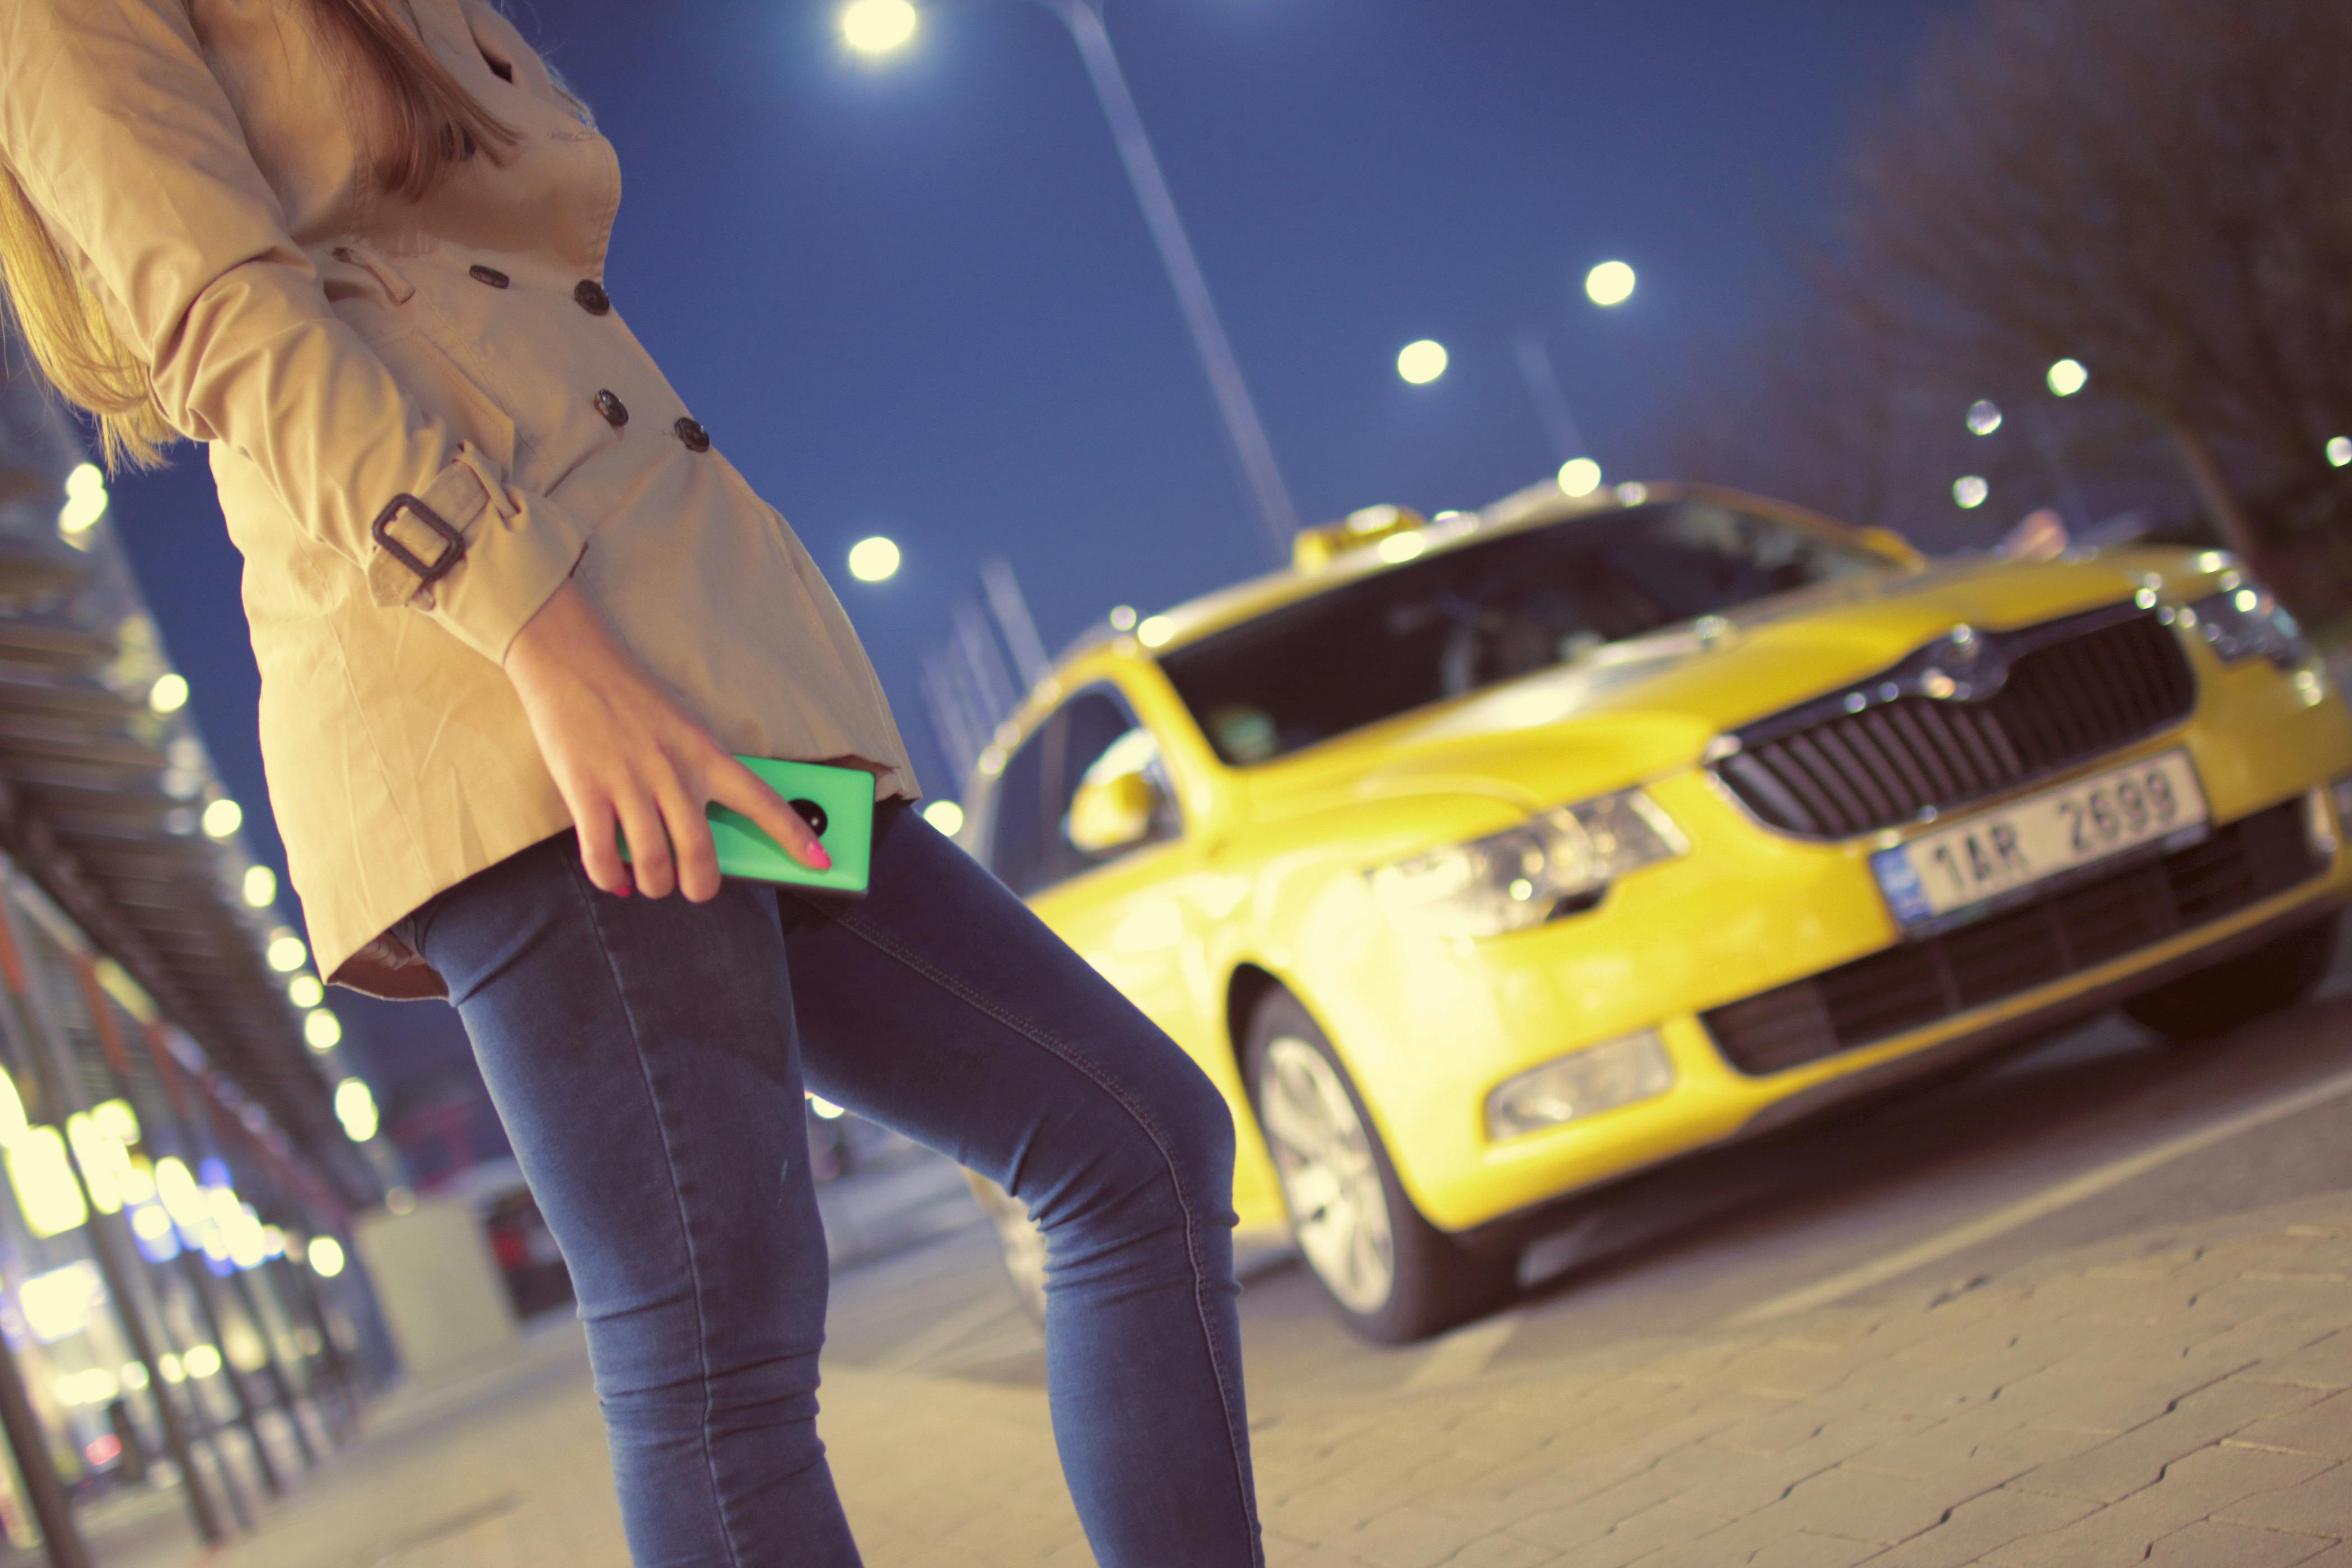 Taxi Photos, Download The BEST Free Taxi Stock Photos & HD Images